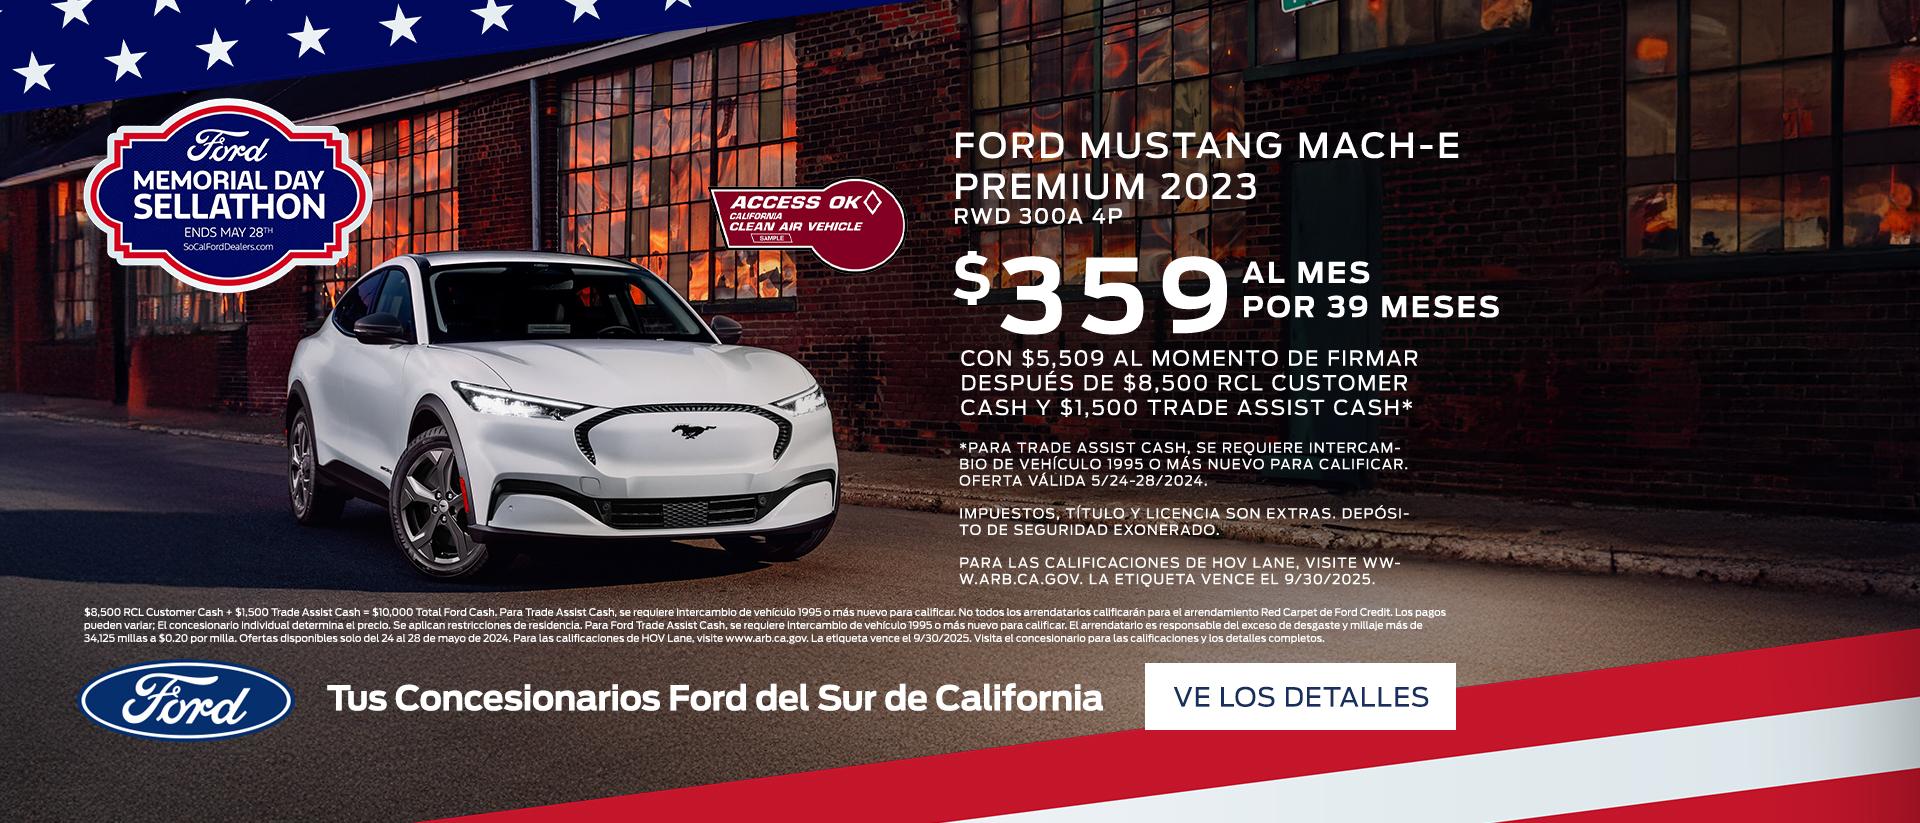 Ford Mustang Mach-E Premium Lease Offer | Memorial Day Sellathon | Southern California Ford Dealers